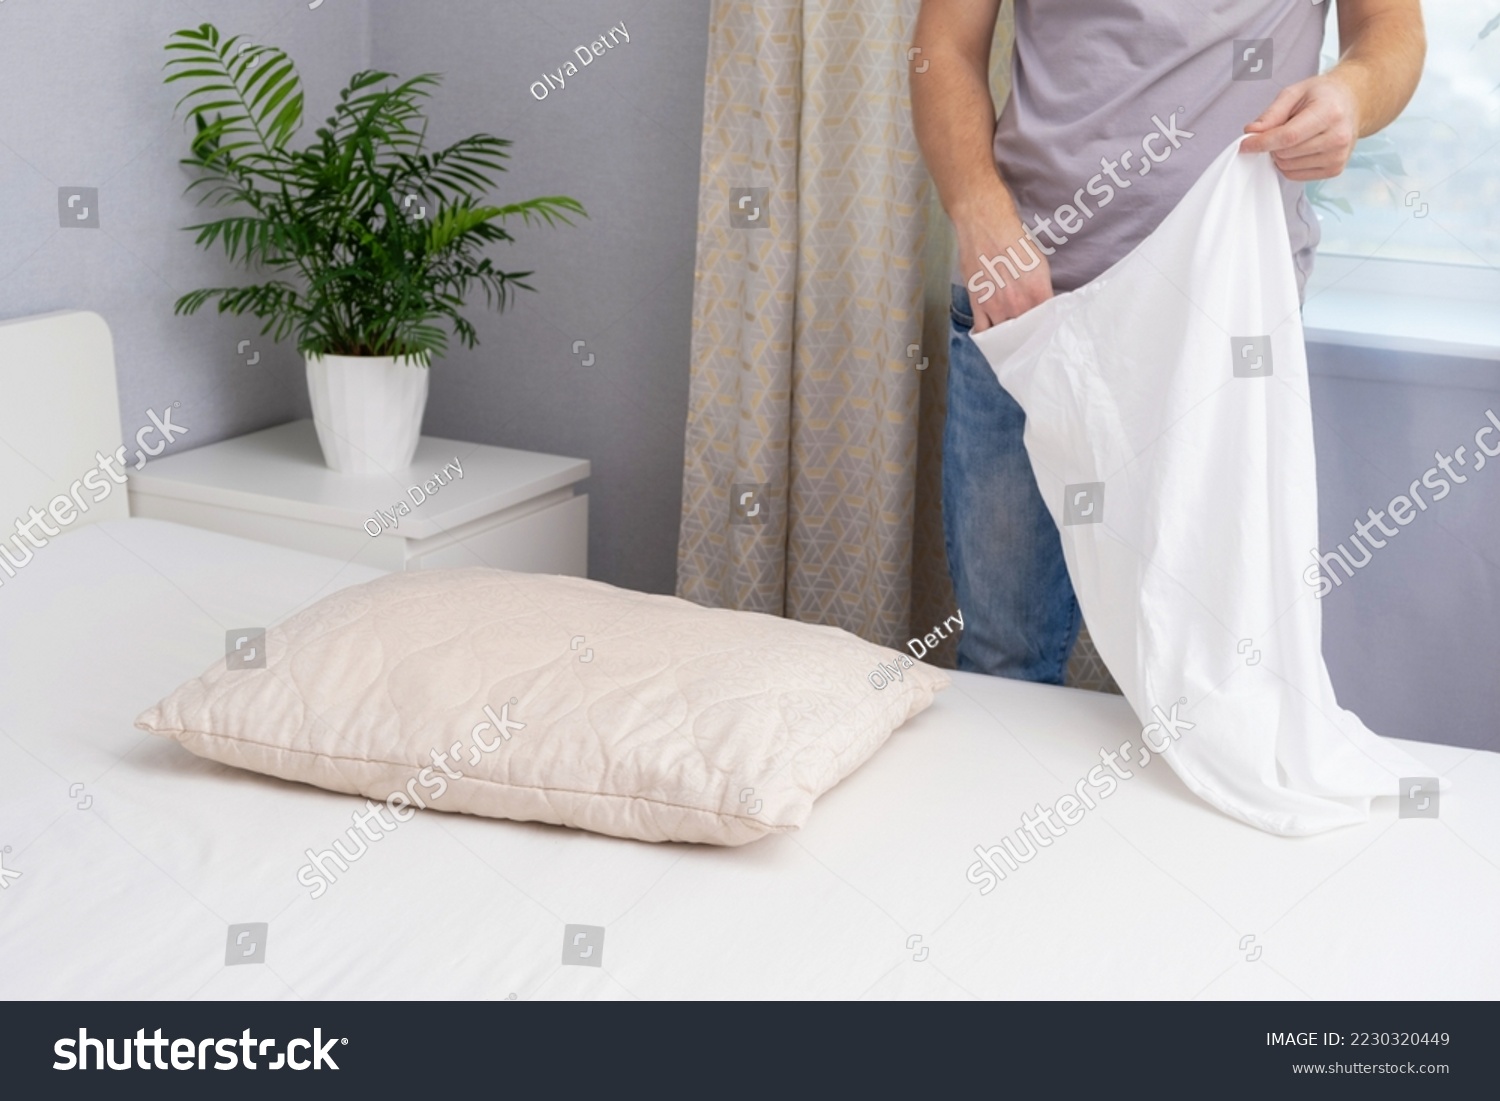 A man tucks a pillow with a fresh bright white pillowcase. Making the bed with fresh bed linen by a white man. The day of the change of bed linen. The day of washing bed linen in the laundry room. #2230320449